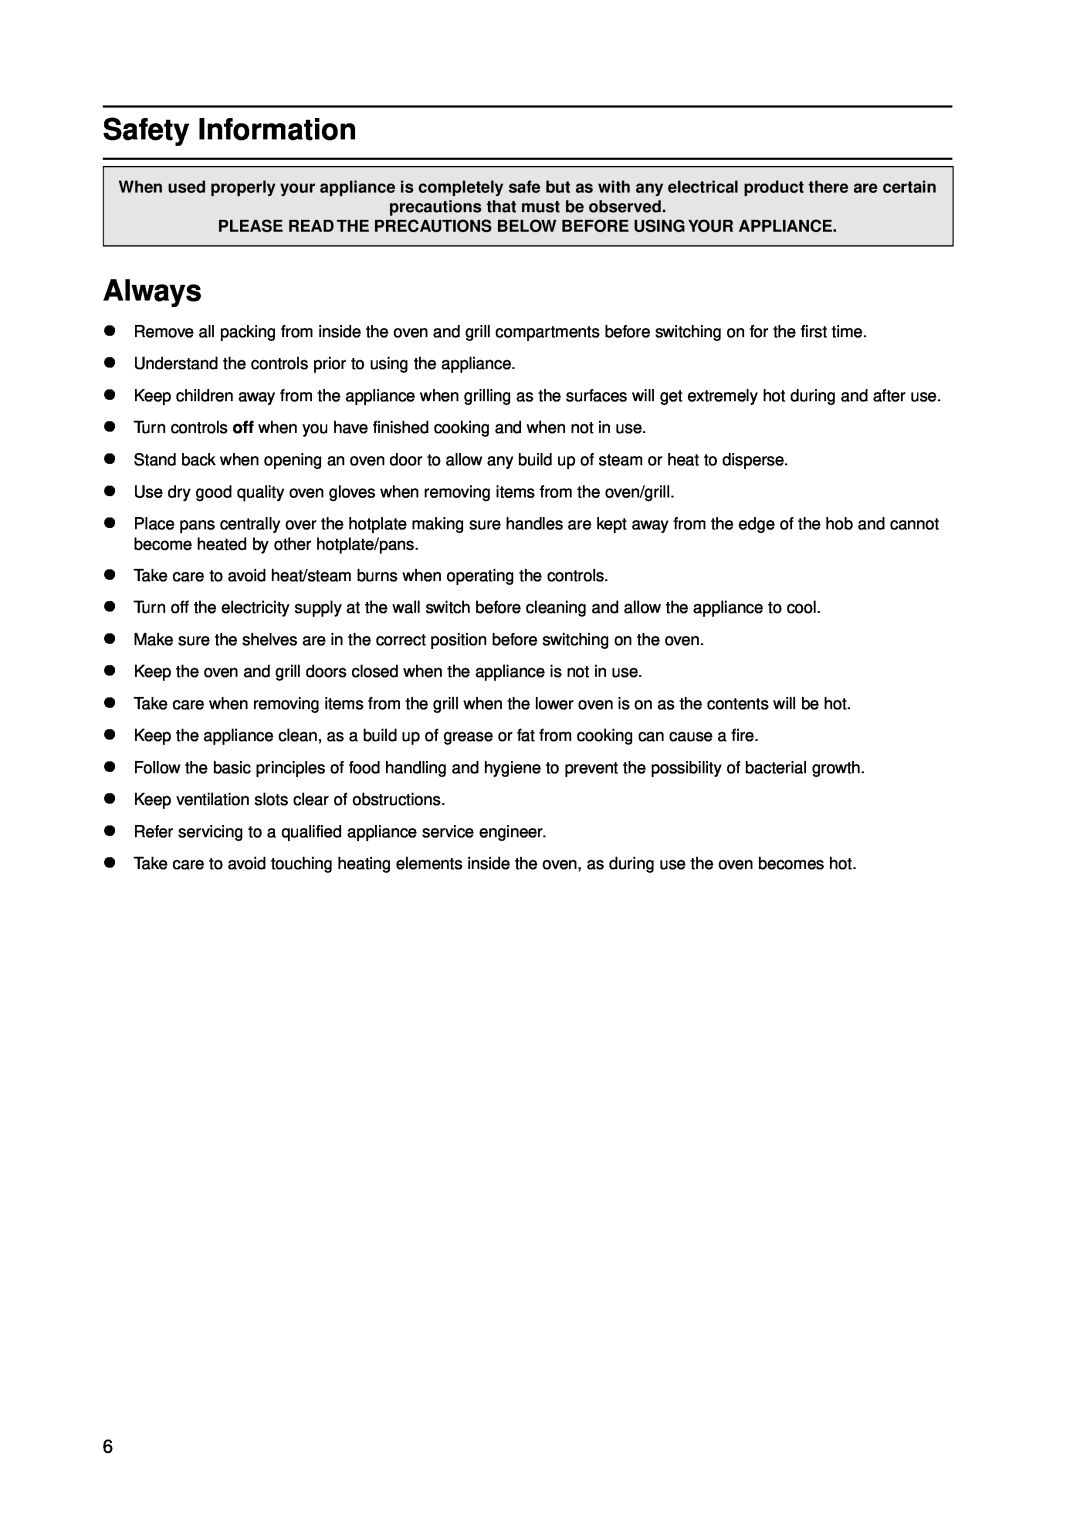 Indesit KD3C11/G manual Safety Information, Always, precautions that must be observed 